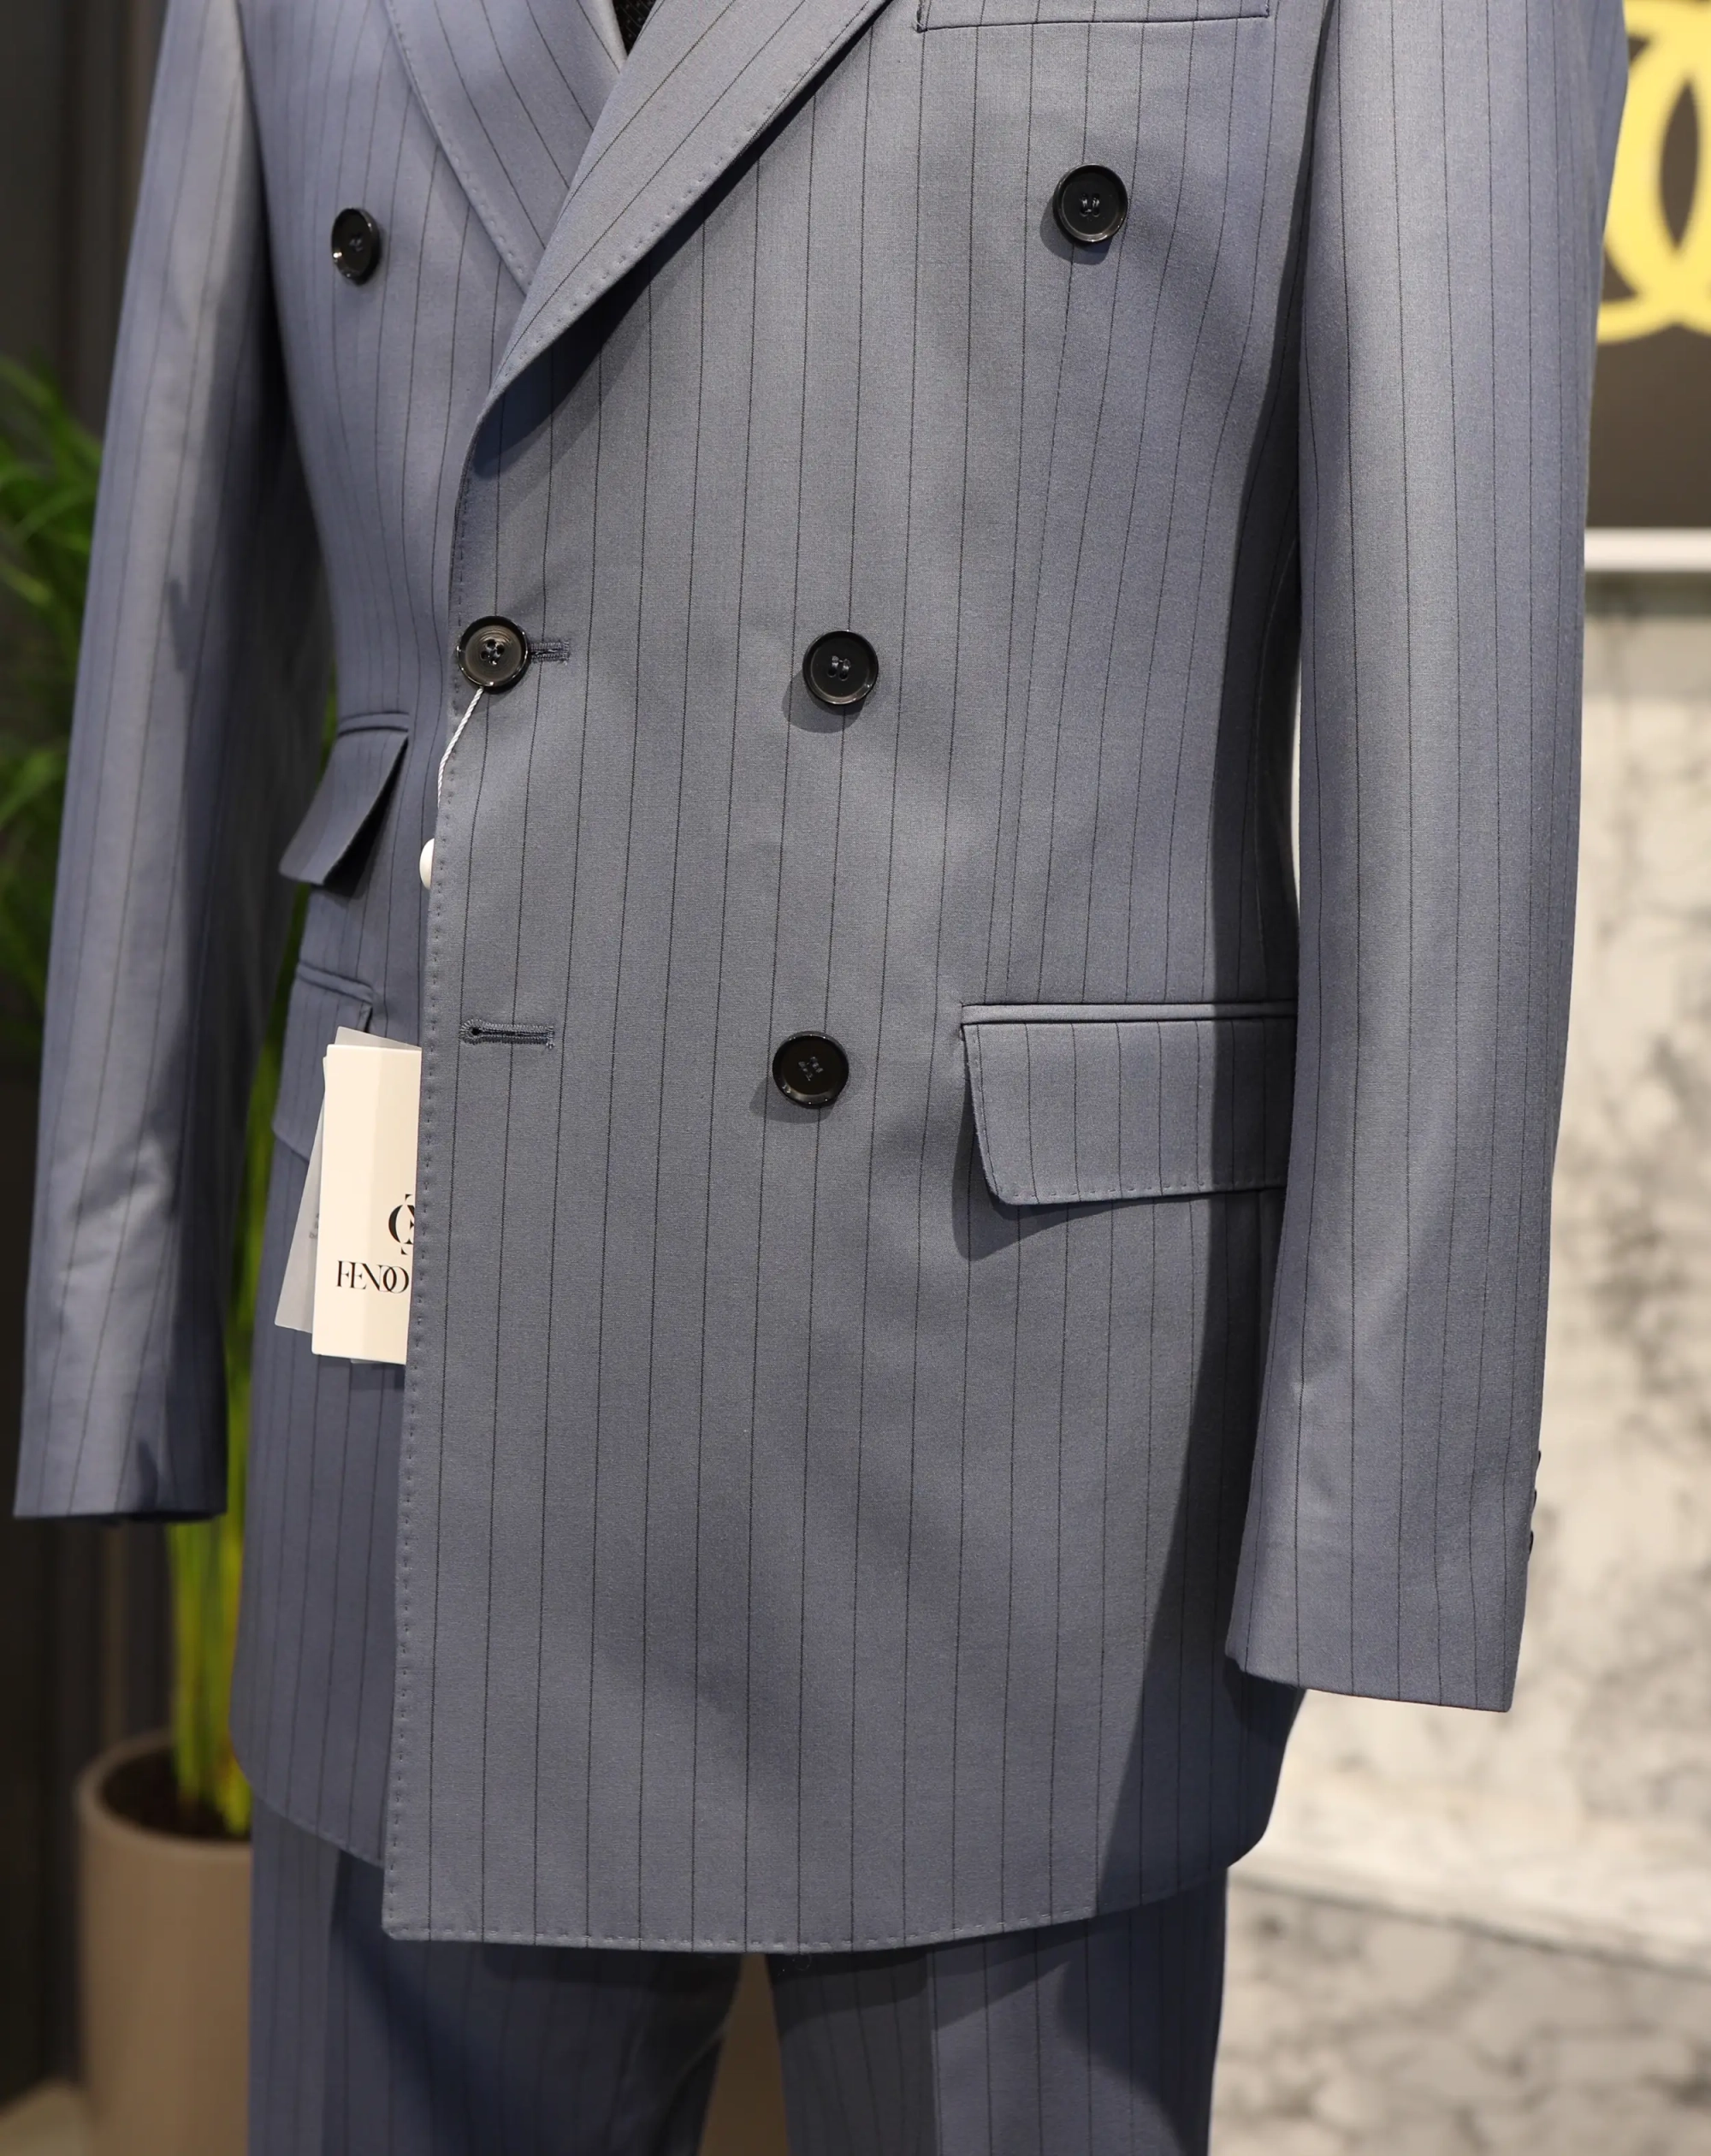 Bischofszell sky blue double breasted suit with black stripes